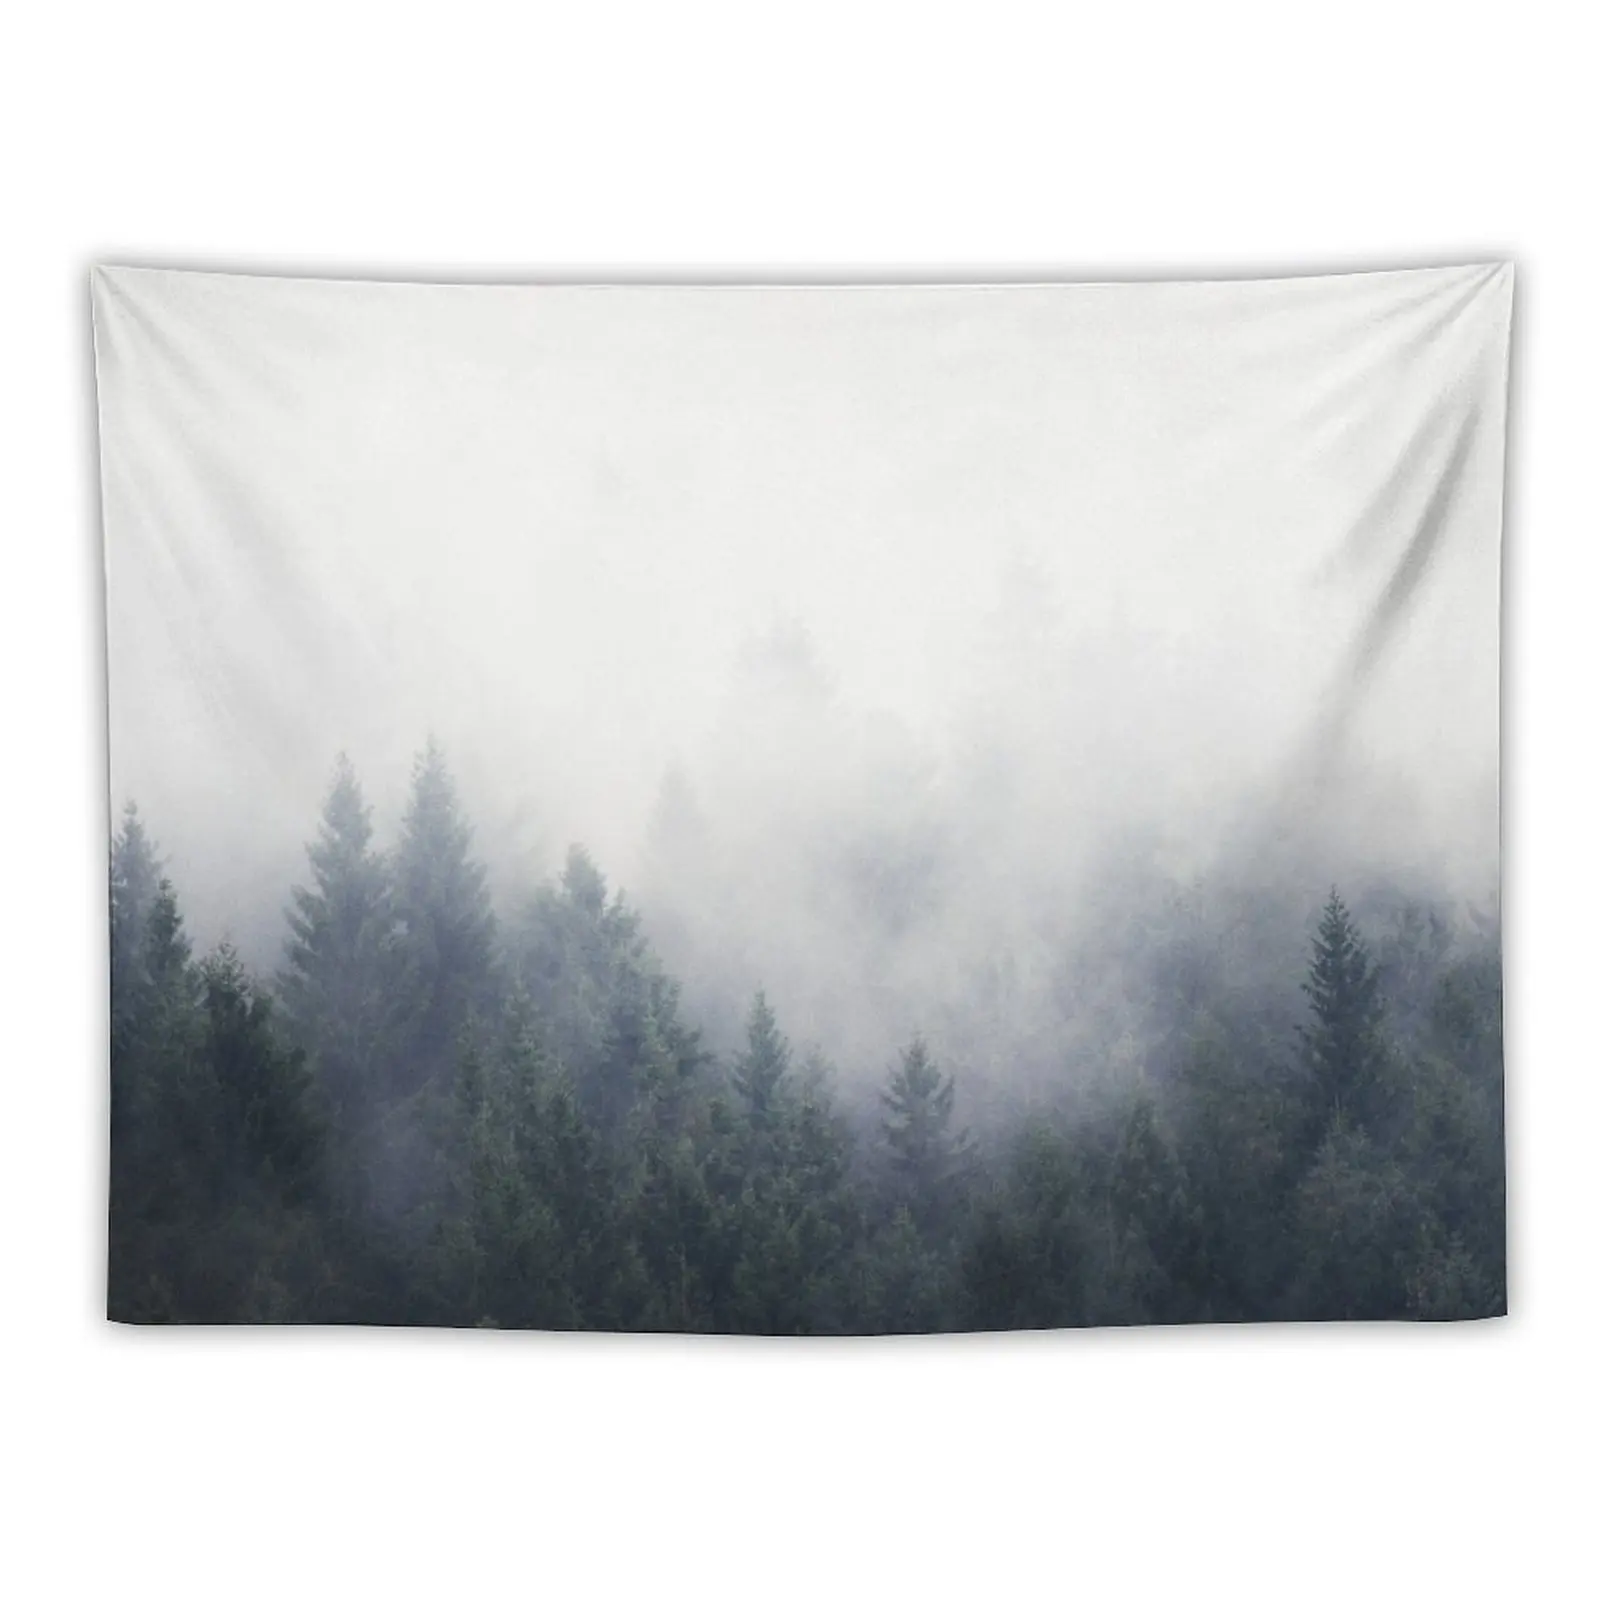 

I Don't Give A Fog Tapestry Mushroom Tapestry Room Decor Aesthetic Wall Decor Hanging